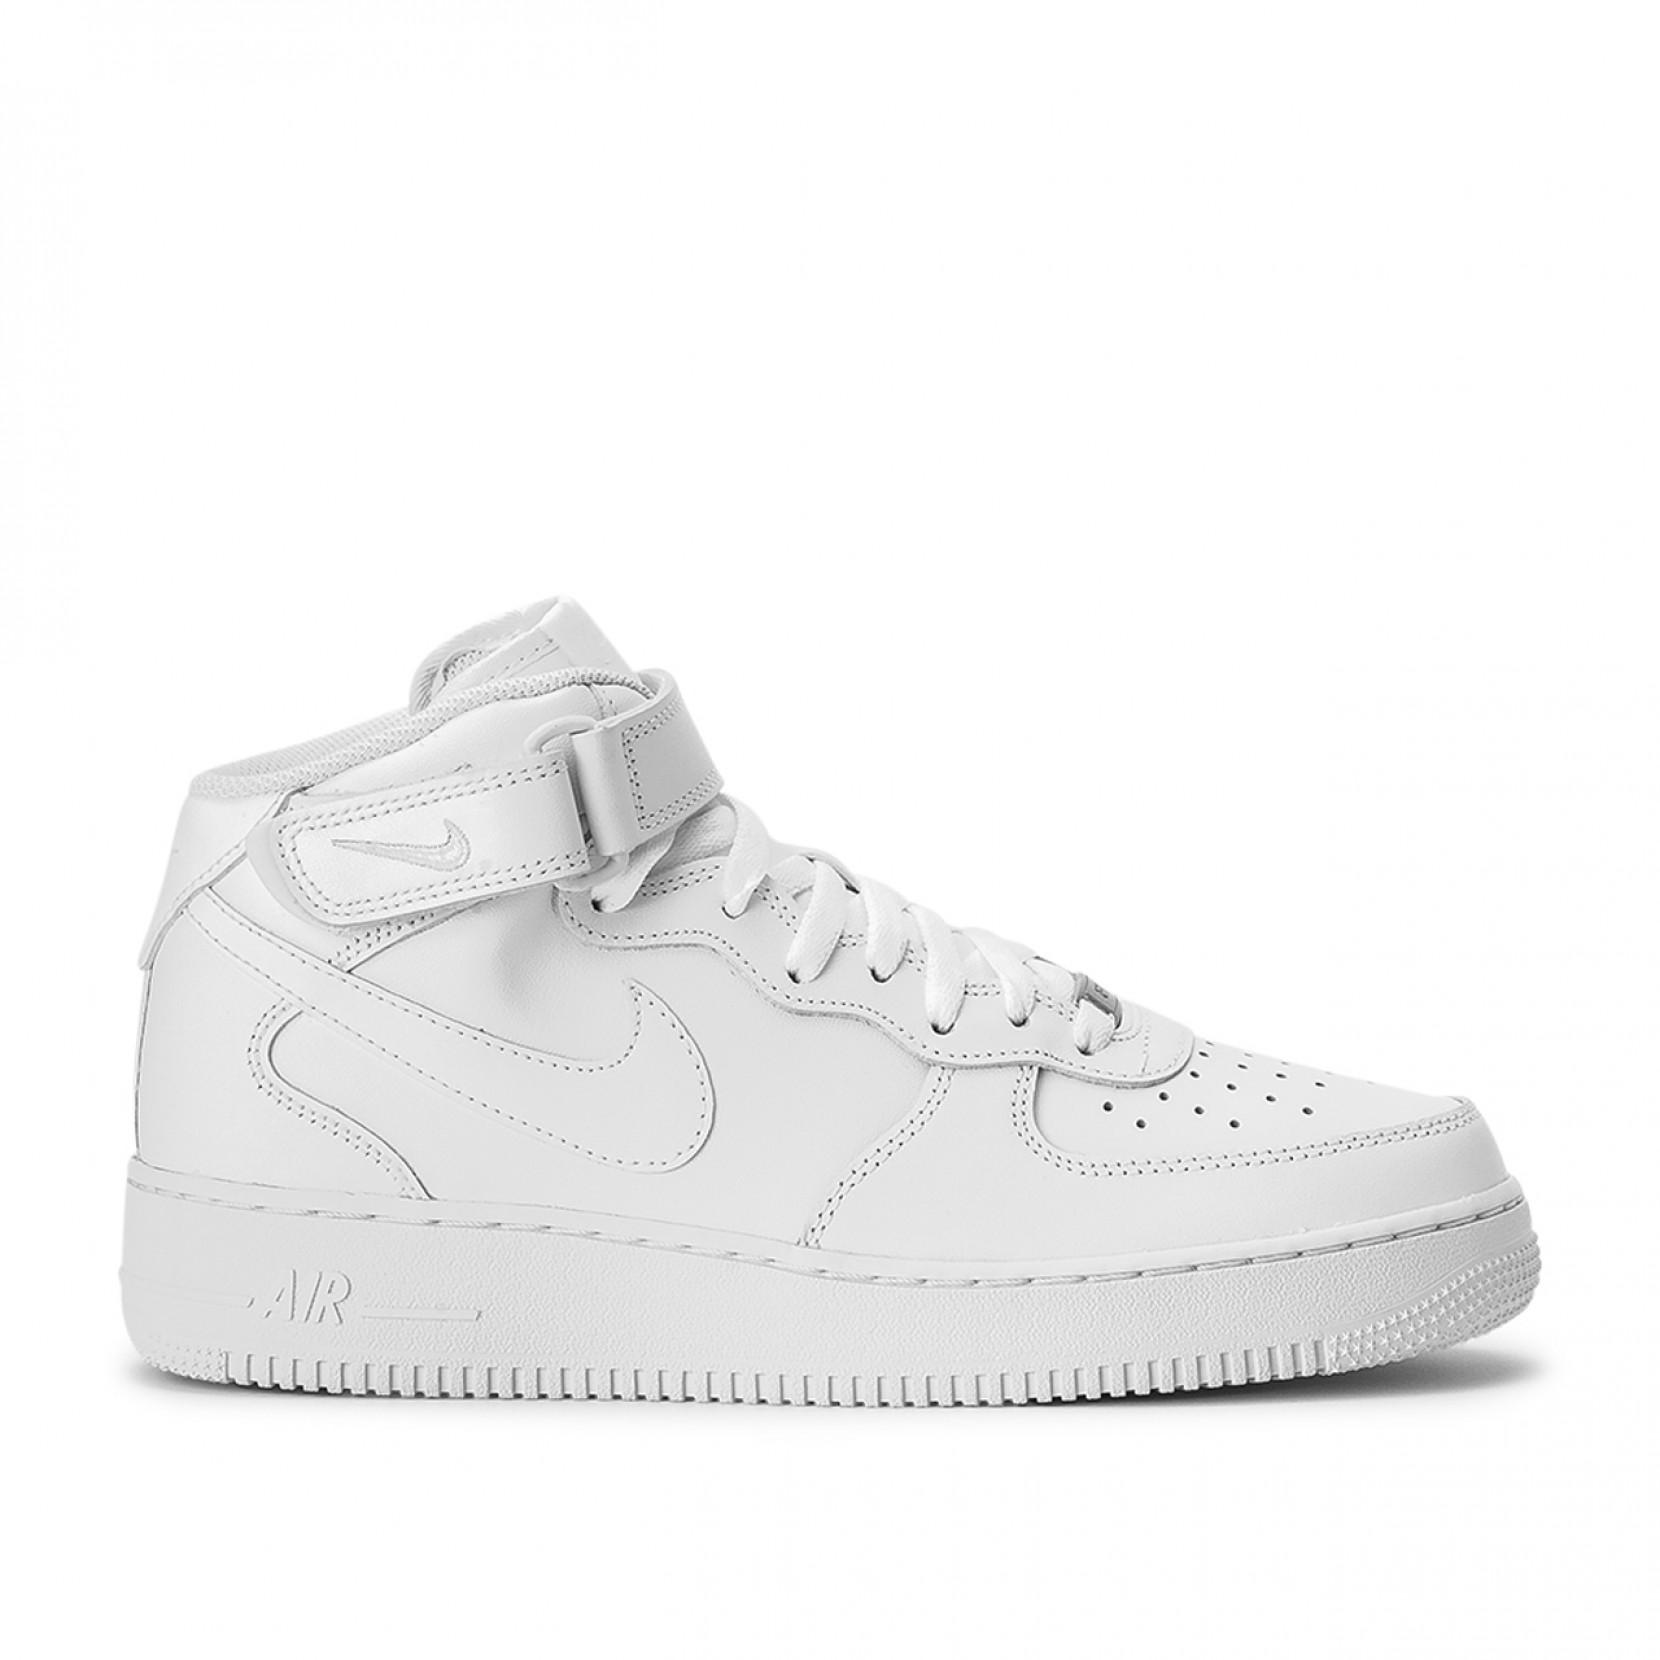 Nike Leather Nike Air Force 1 Mid '07 in White for Men - Lyst